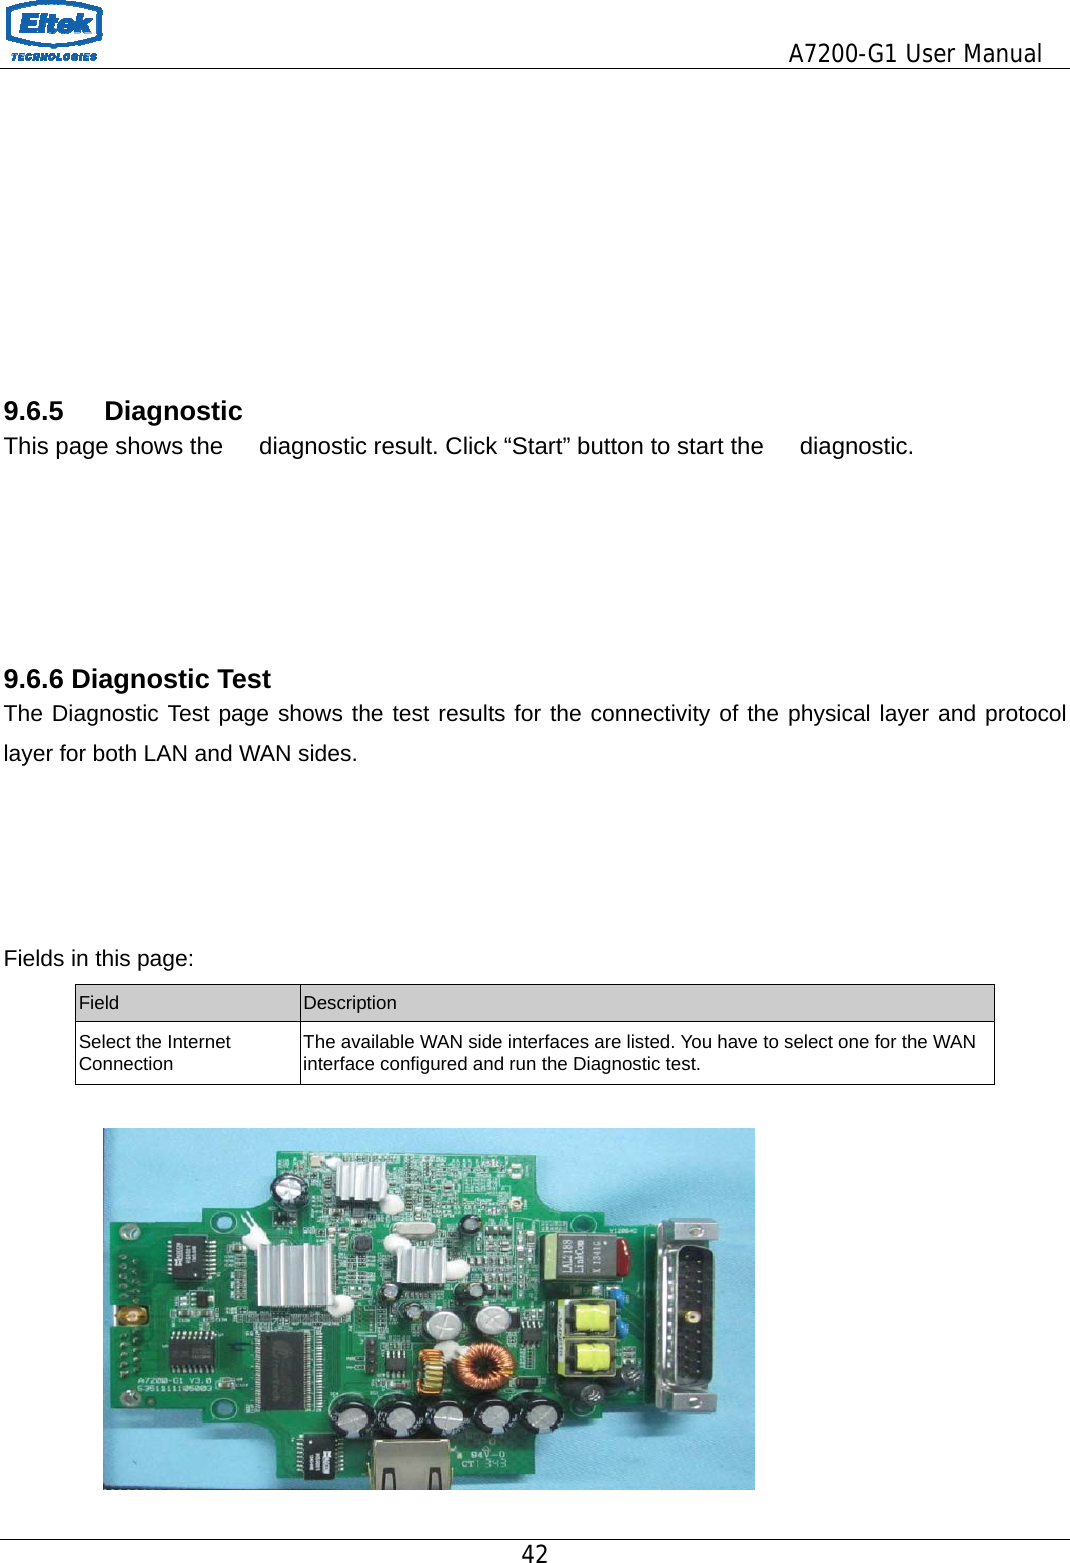                                         A7200-G1 User Manual 42         9.6.5   Diagnostic  This page shows the      diagnostic result. Click “Start” button to start the      diagnostic.      9.6.6 Diagnostic Test The Diagnostic Test page shows the test results for the connectivity of the physical layer and protocol layer for both LAN and WAN sides.     Fields in this page: Field  Description Select the Internet Connection  The available WAN side interfaces are listed. You have to select one for the WAN interface configured and run the Diagnostic test.    